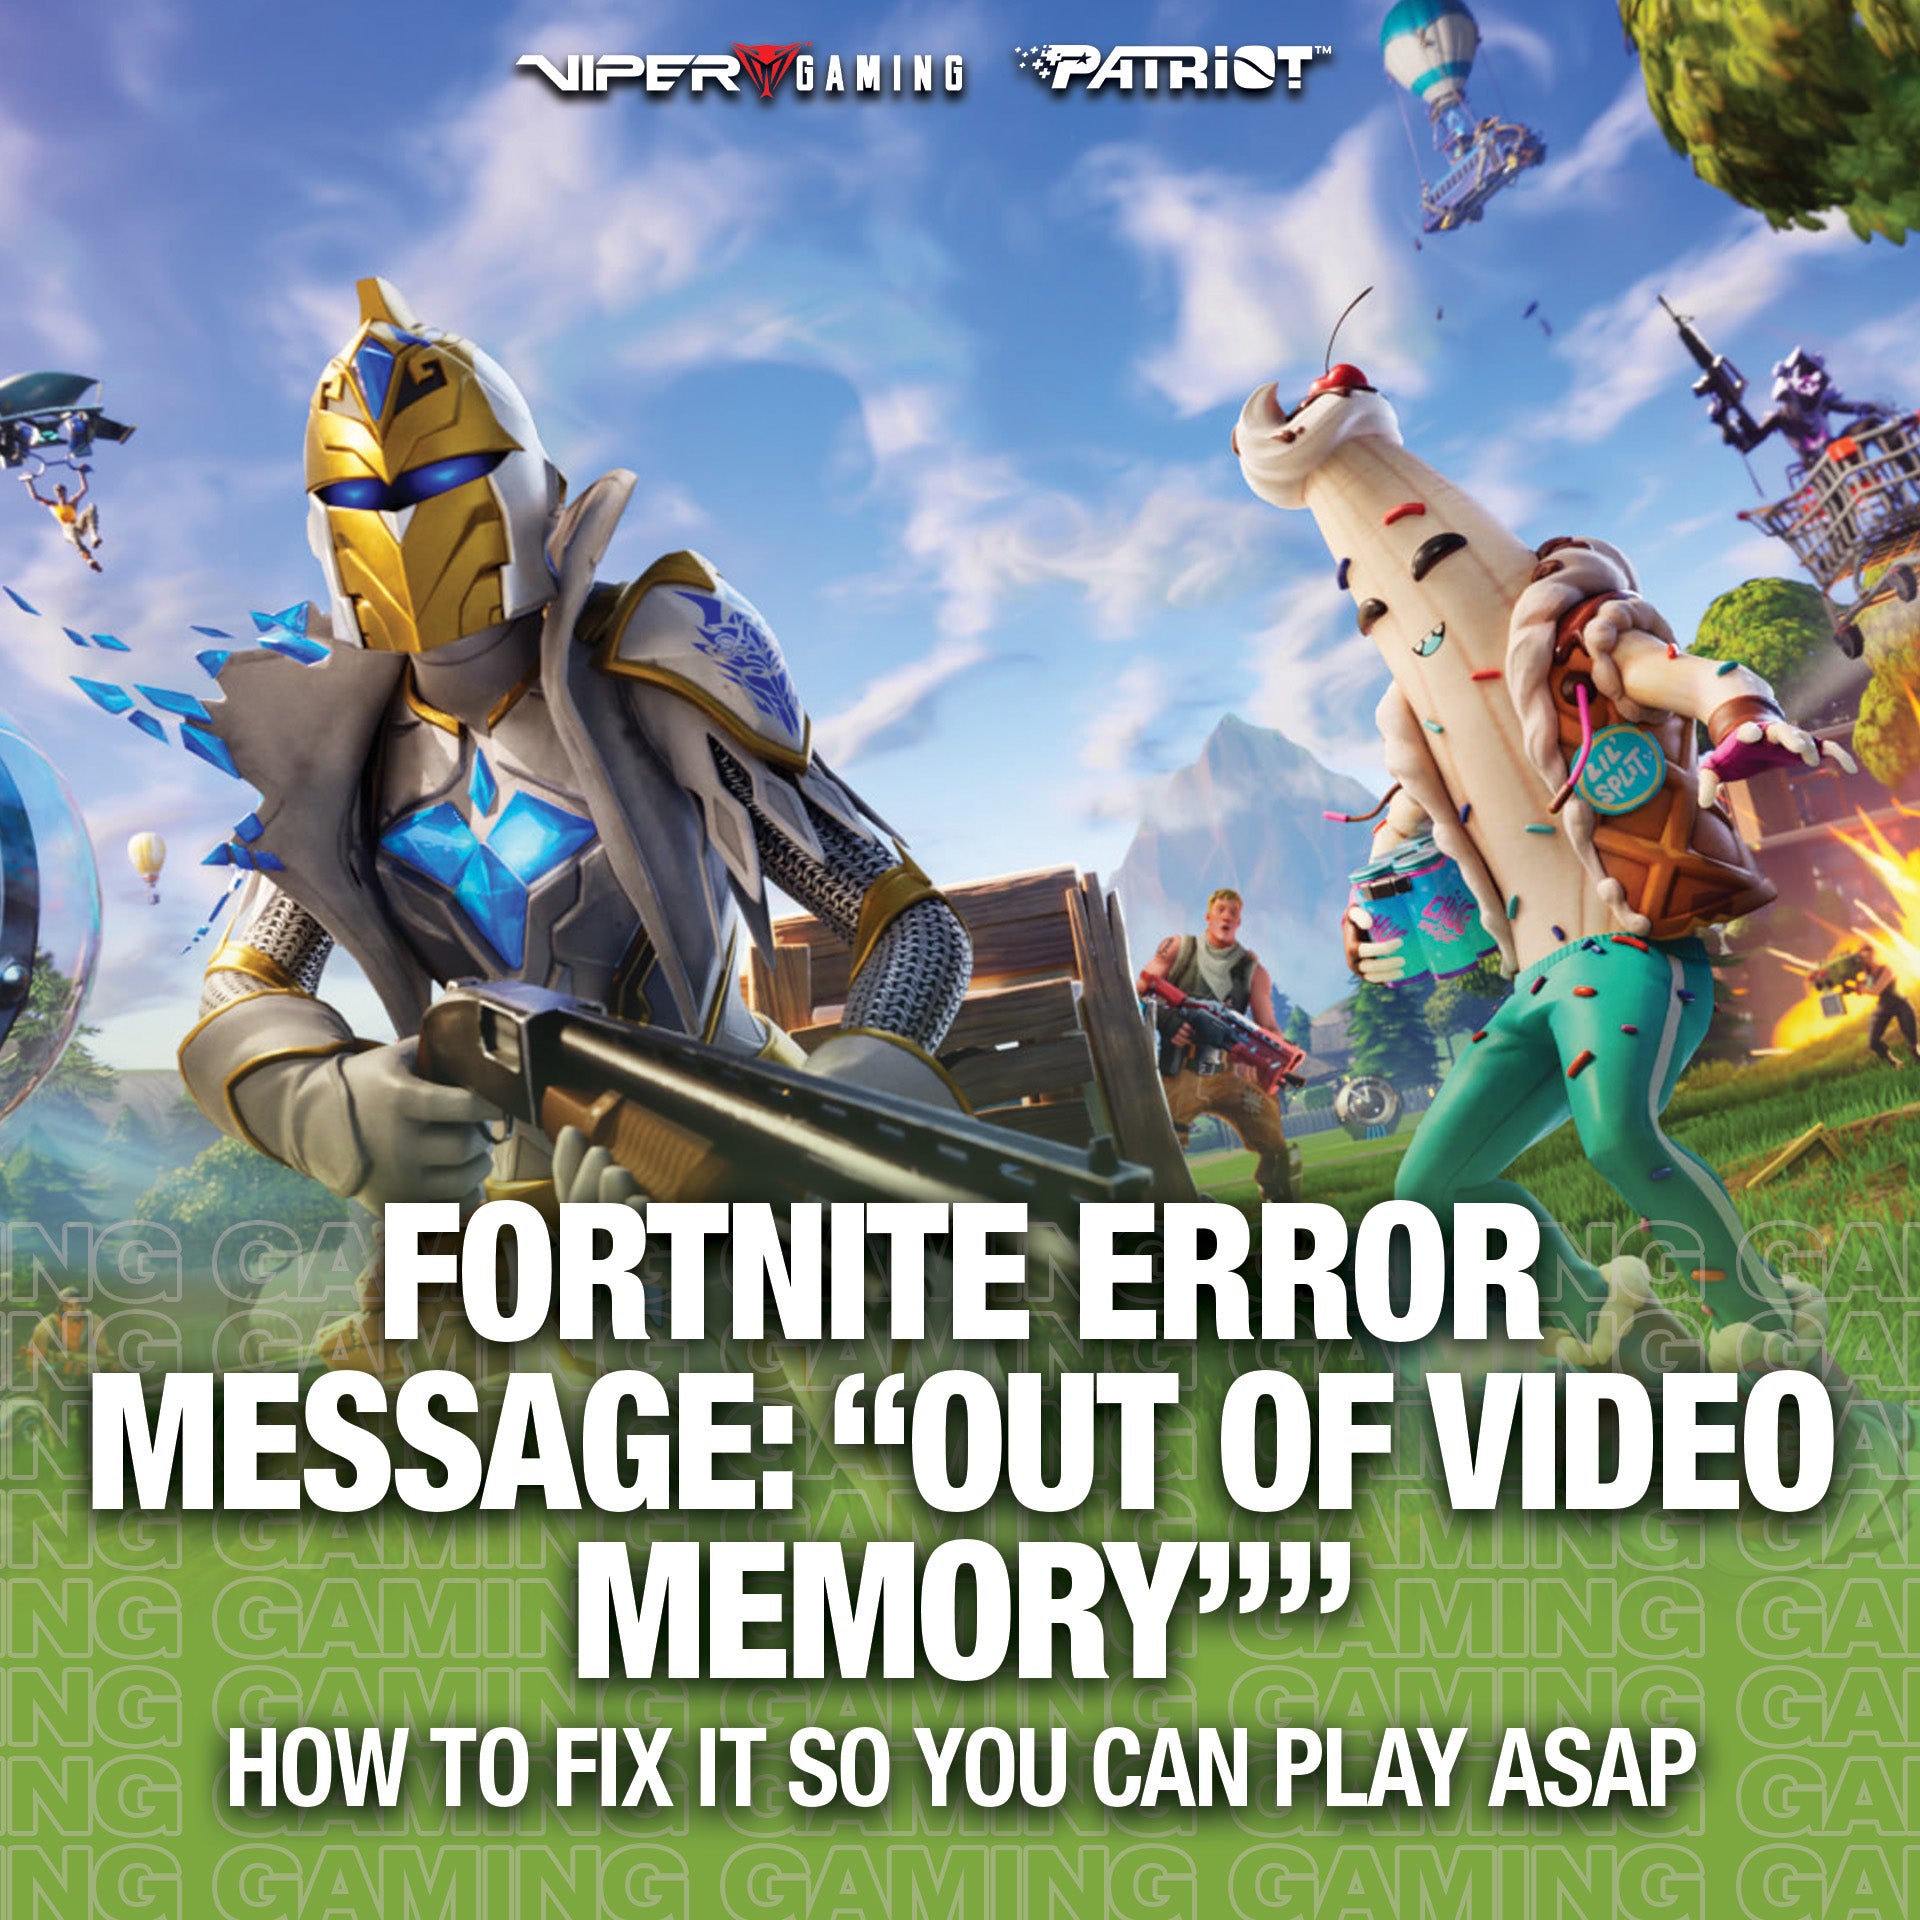 Fortnite Error code 0 How to fix it and What does it mean?